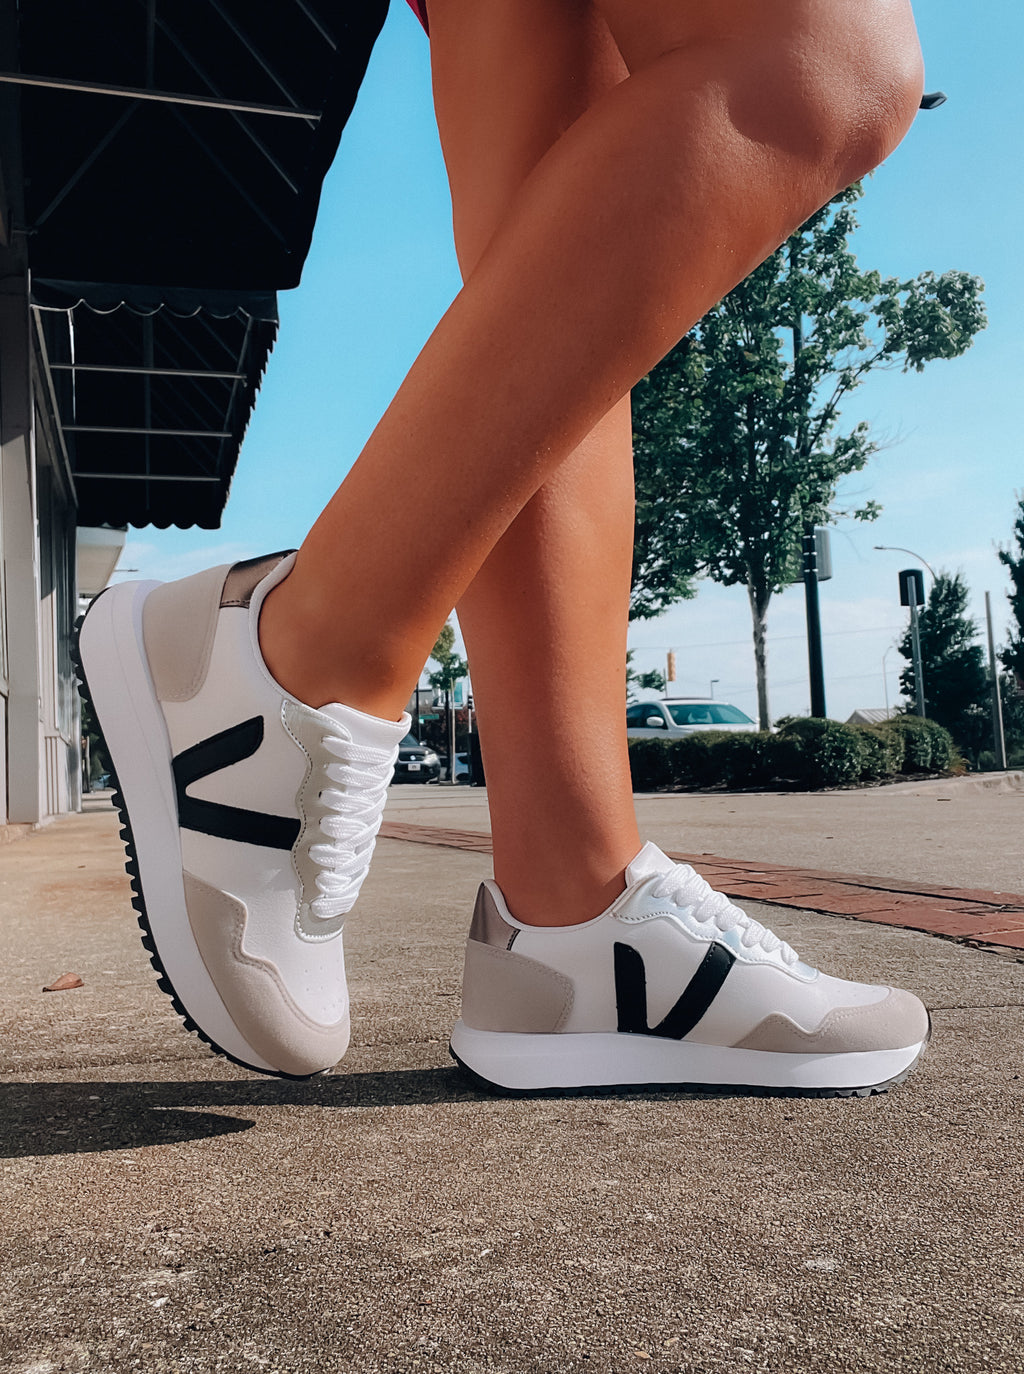 Introducing the Savor The Sweetness Sneakers! Step out in comfort and style in these black and white kicks, with memory foam insoles to cradle your feet in all the right places. Plus, lacing up will be a breeze - and even more fun than usual! Slide into sweet comfort and lasting style.